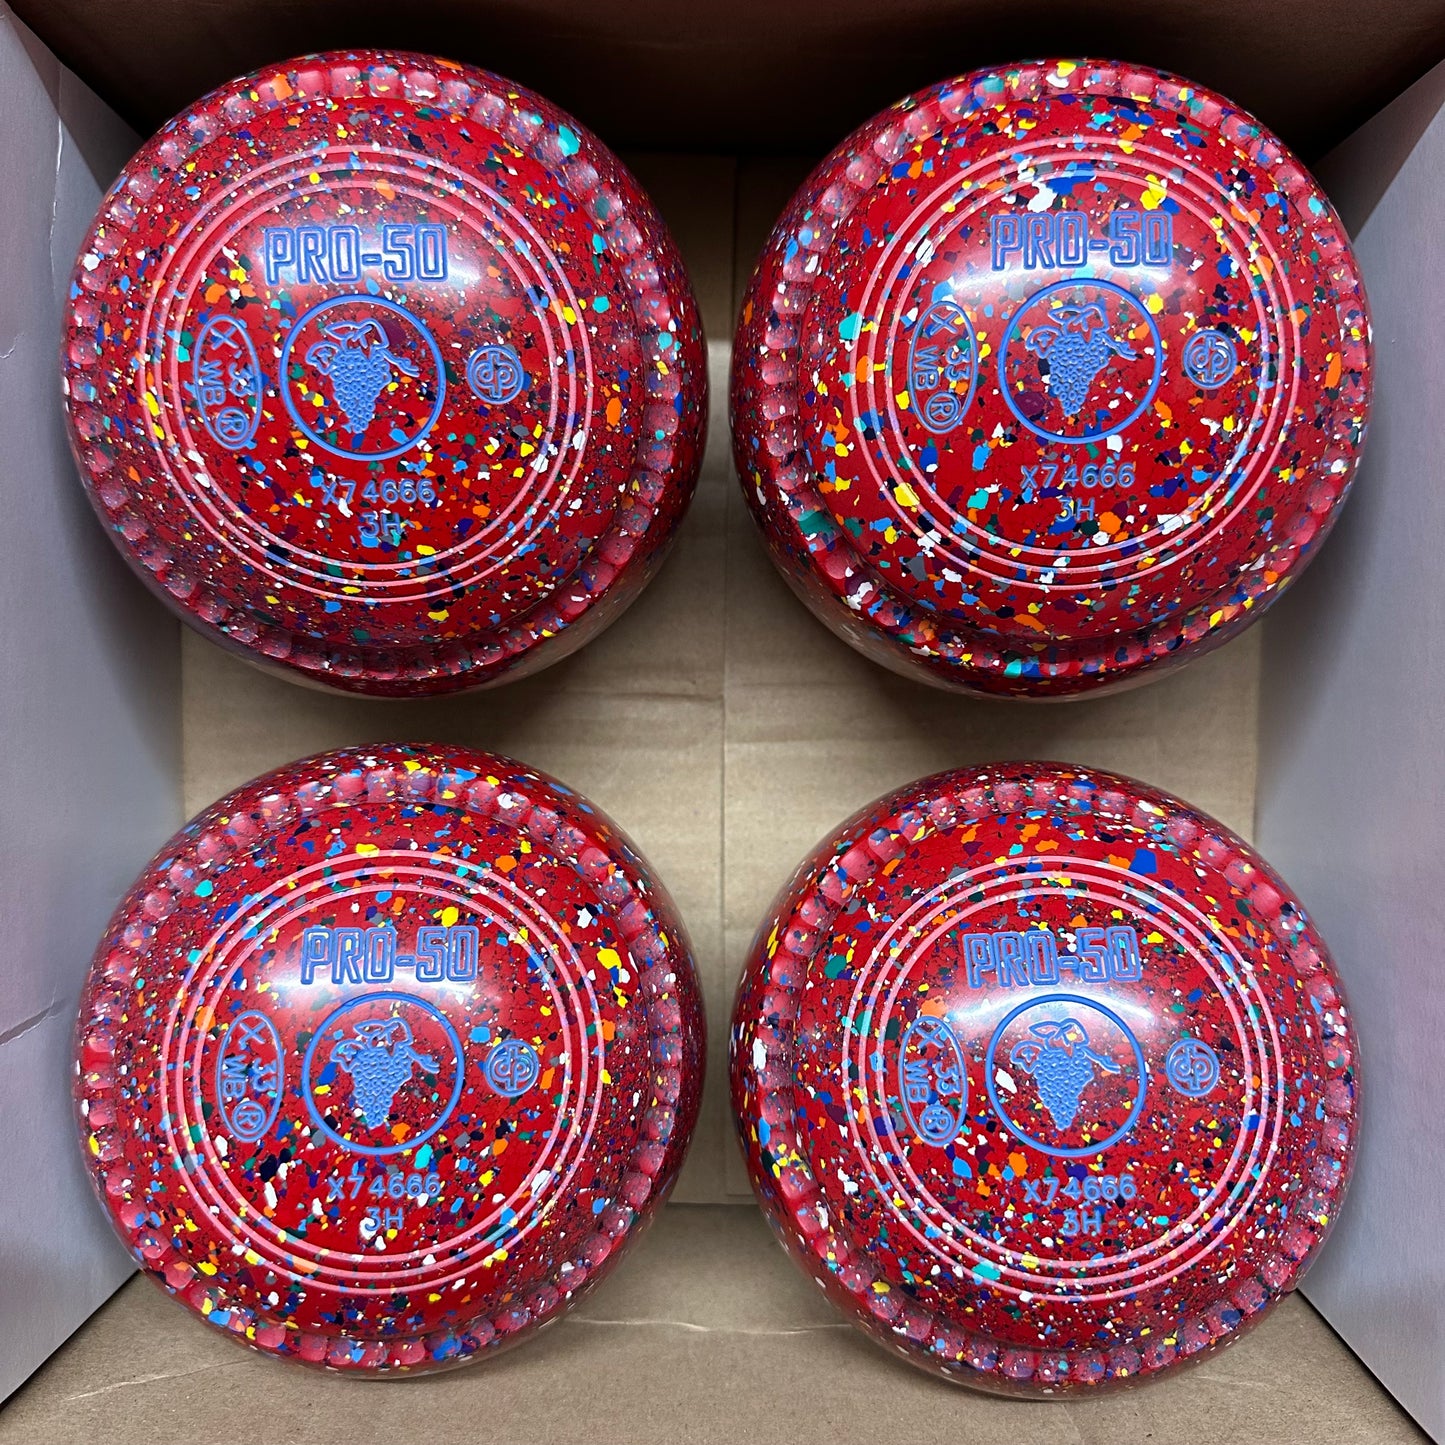 Drakes Pride PRO-50 - Size 3H - Red Harlequin (Blue Rings) - WB33 Stamp